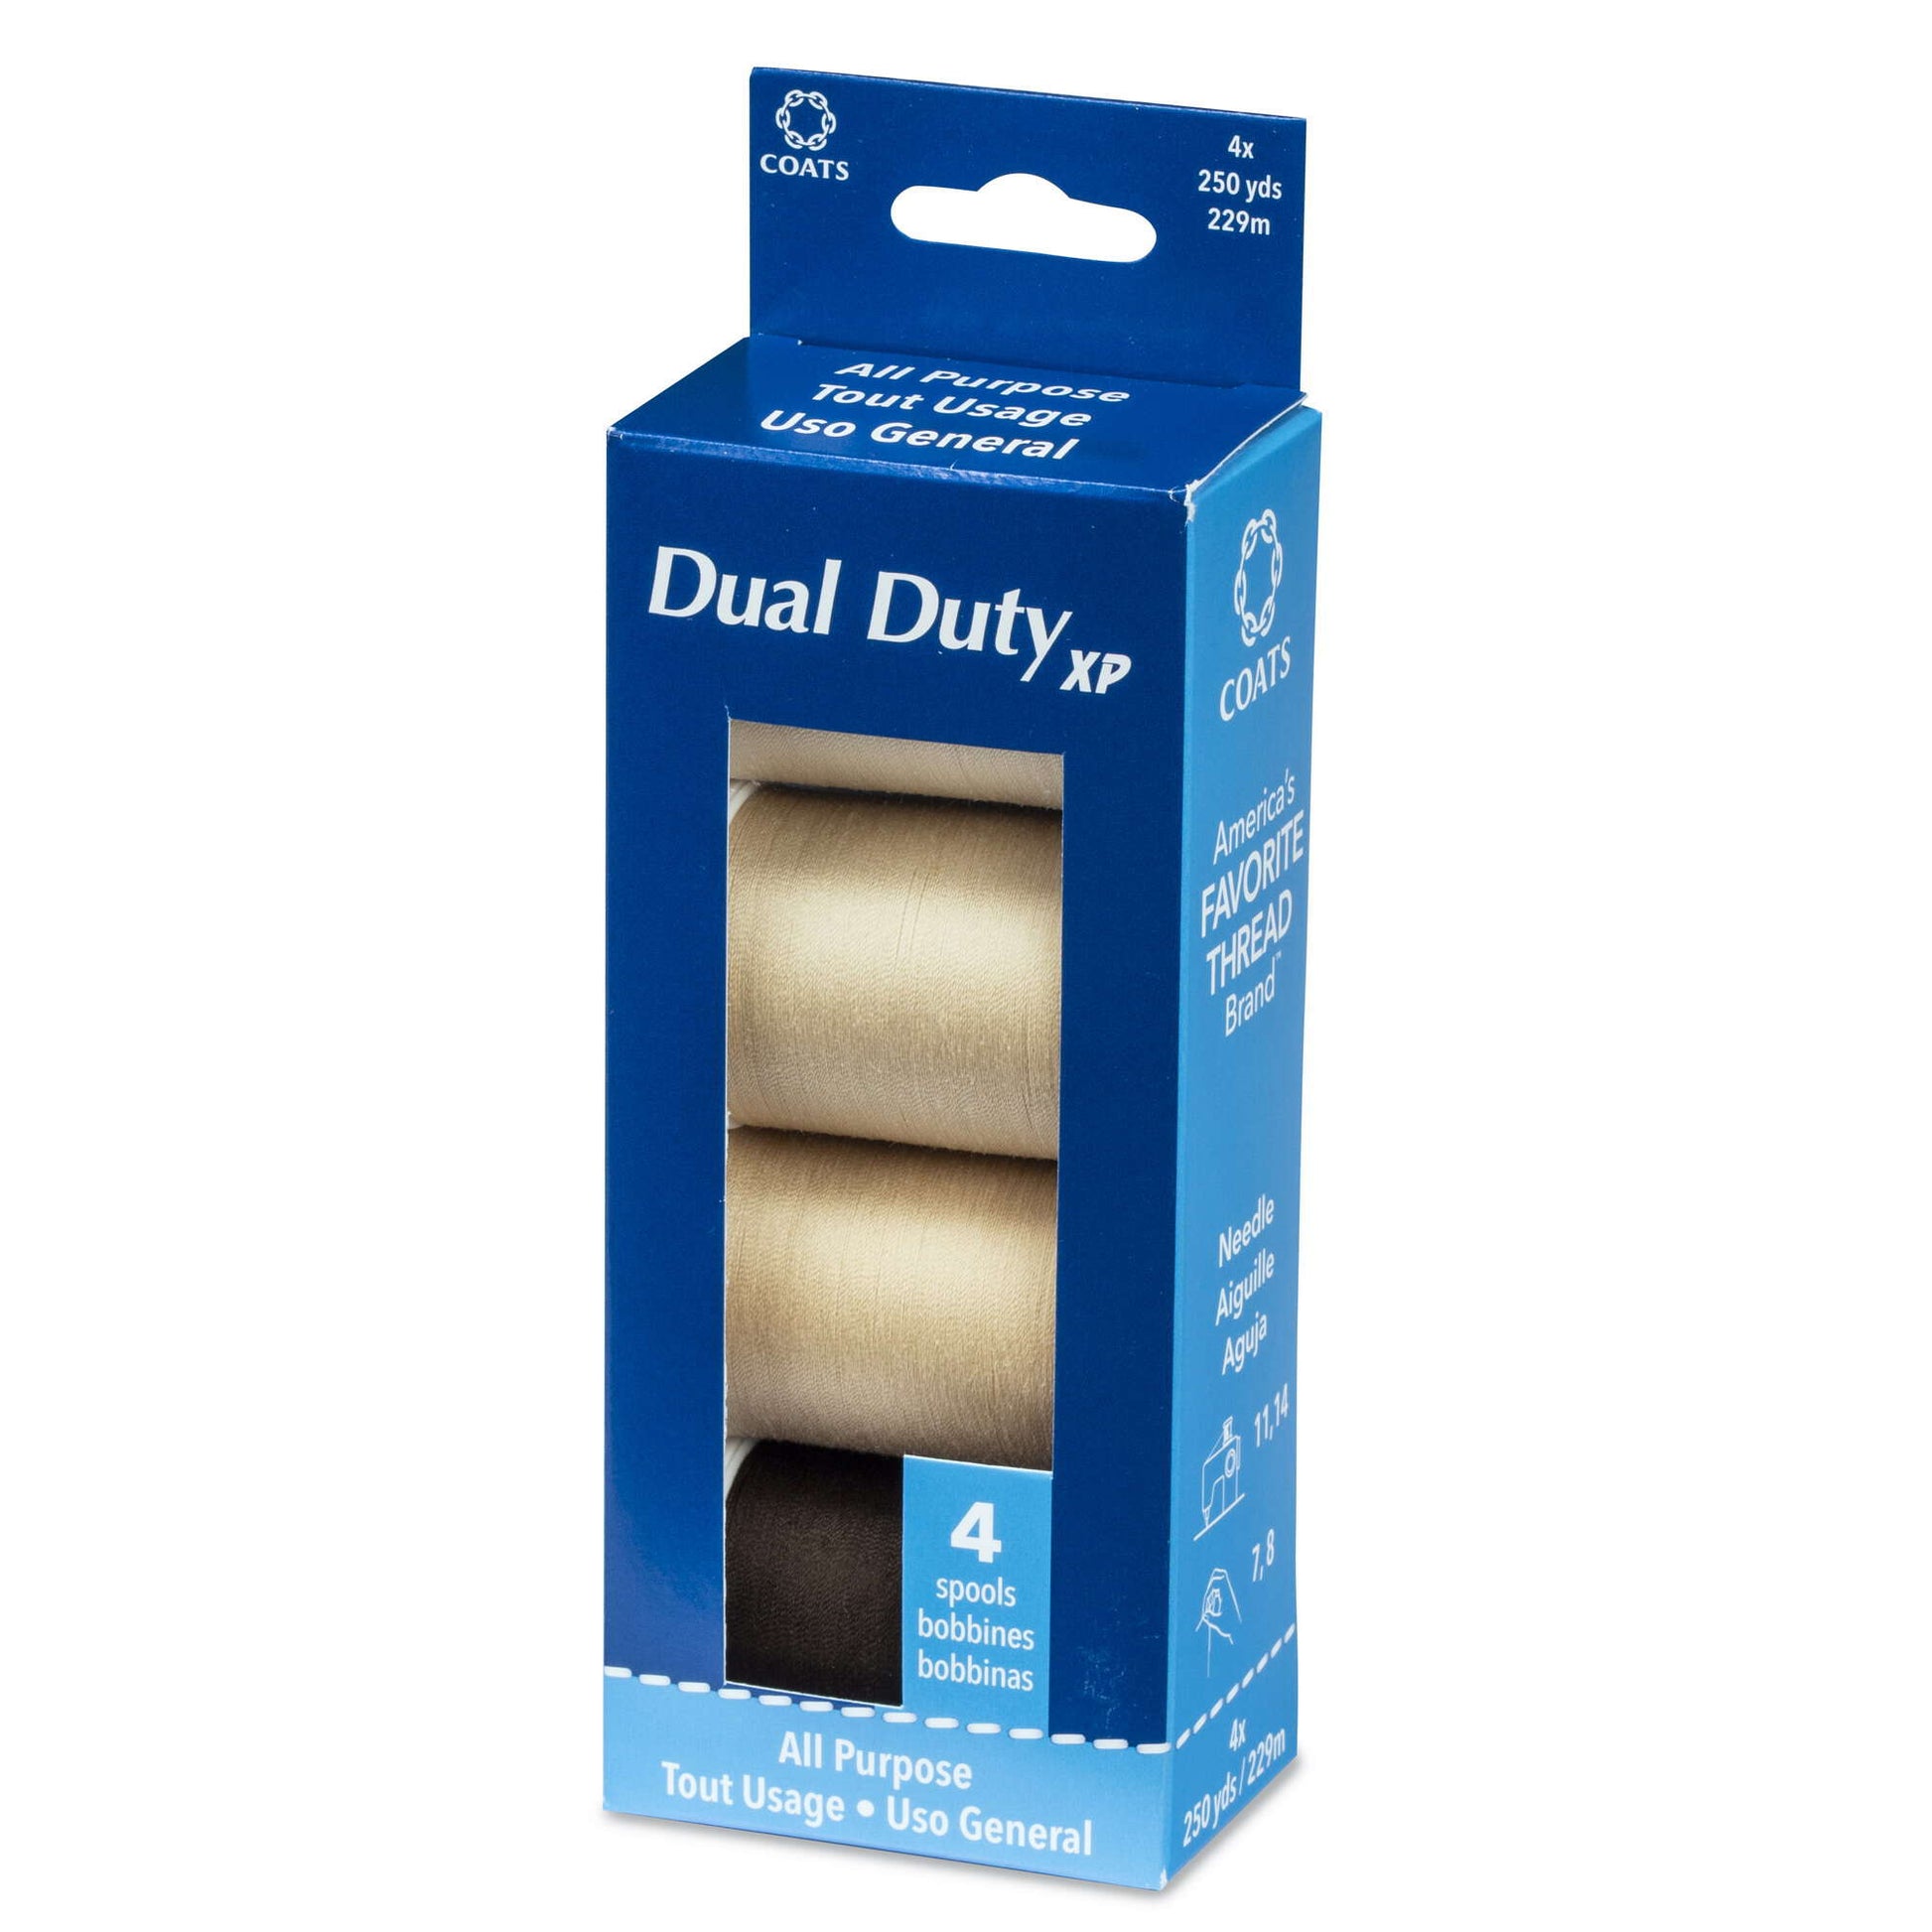 Dual Duty XP All Purpose Sewing Thread, 4 Spools Browns